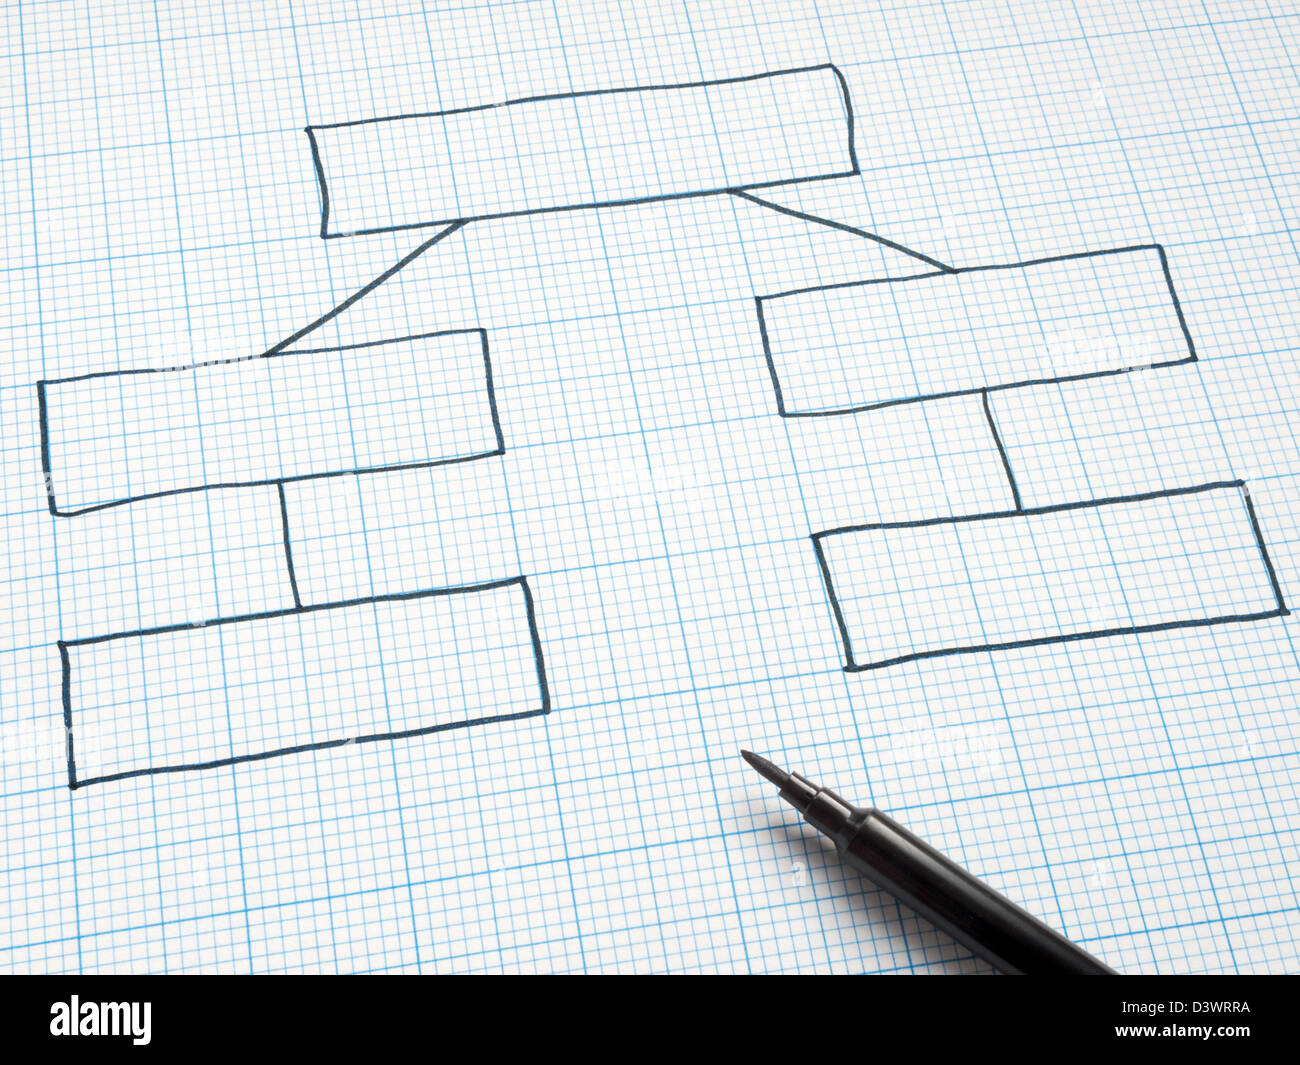 Blank organisation flow chart drawn on square graph paper. Stock Photo